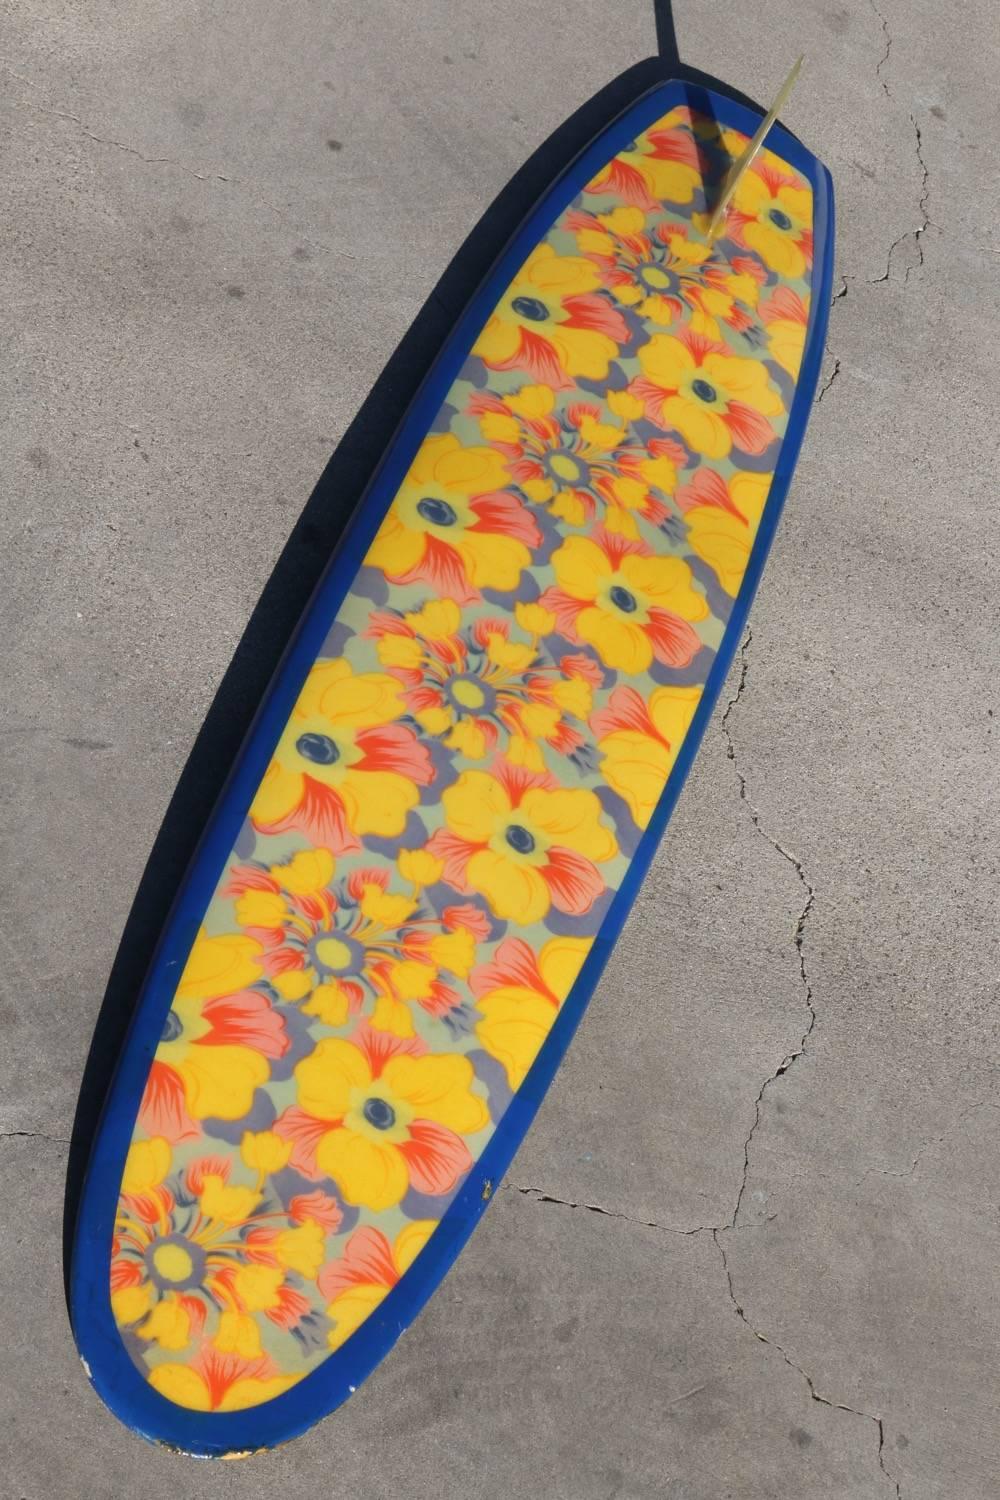 This all original surfboard offers 2 completely different floral patterns, one on the deck (top) and another on the bottom.  A riot of color from either side. Wonderful to rotate and display depending on your mood or the environment.
Made circa